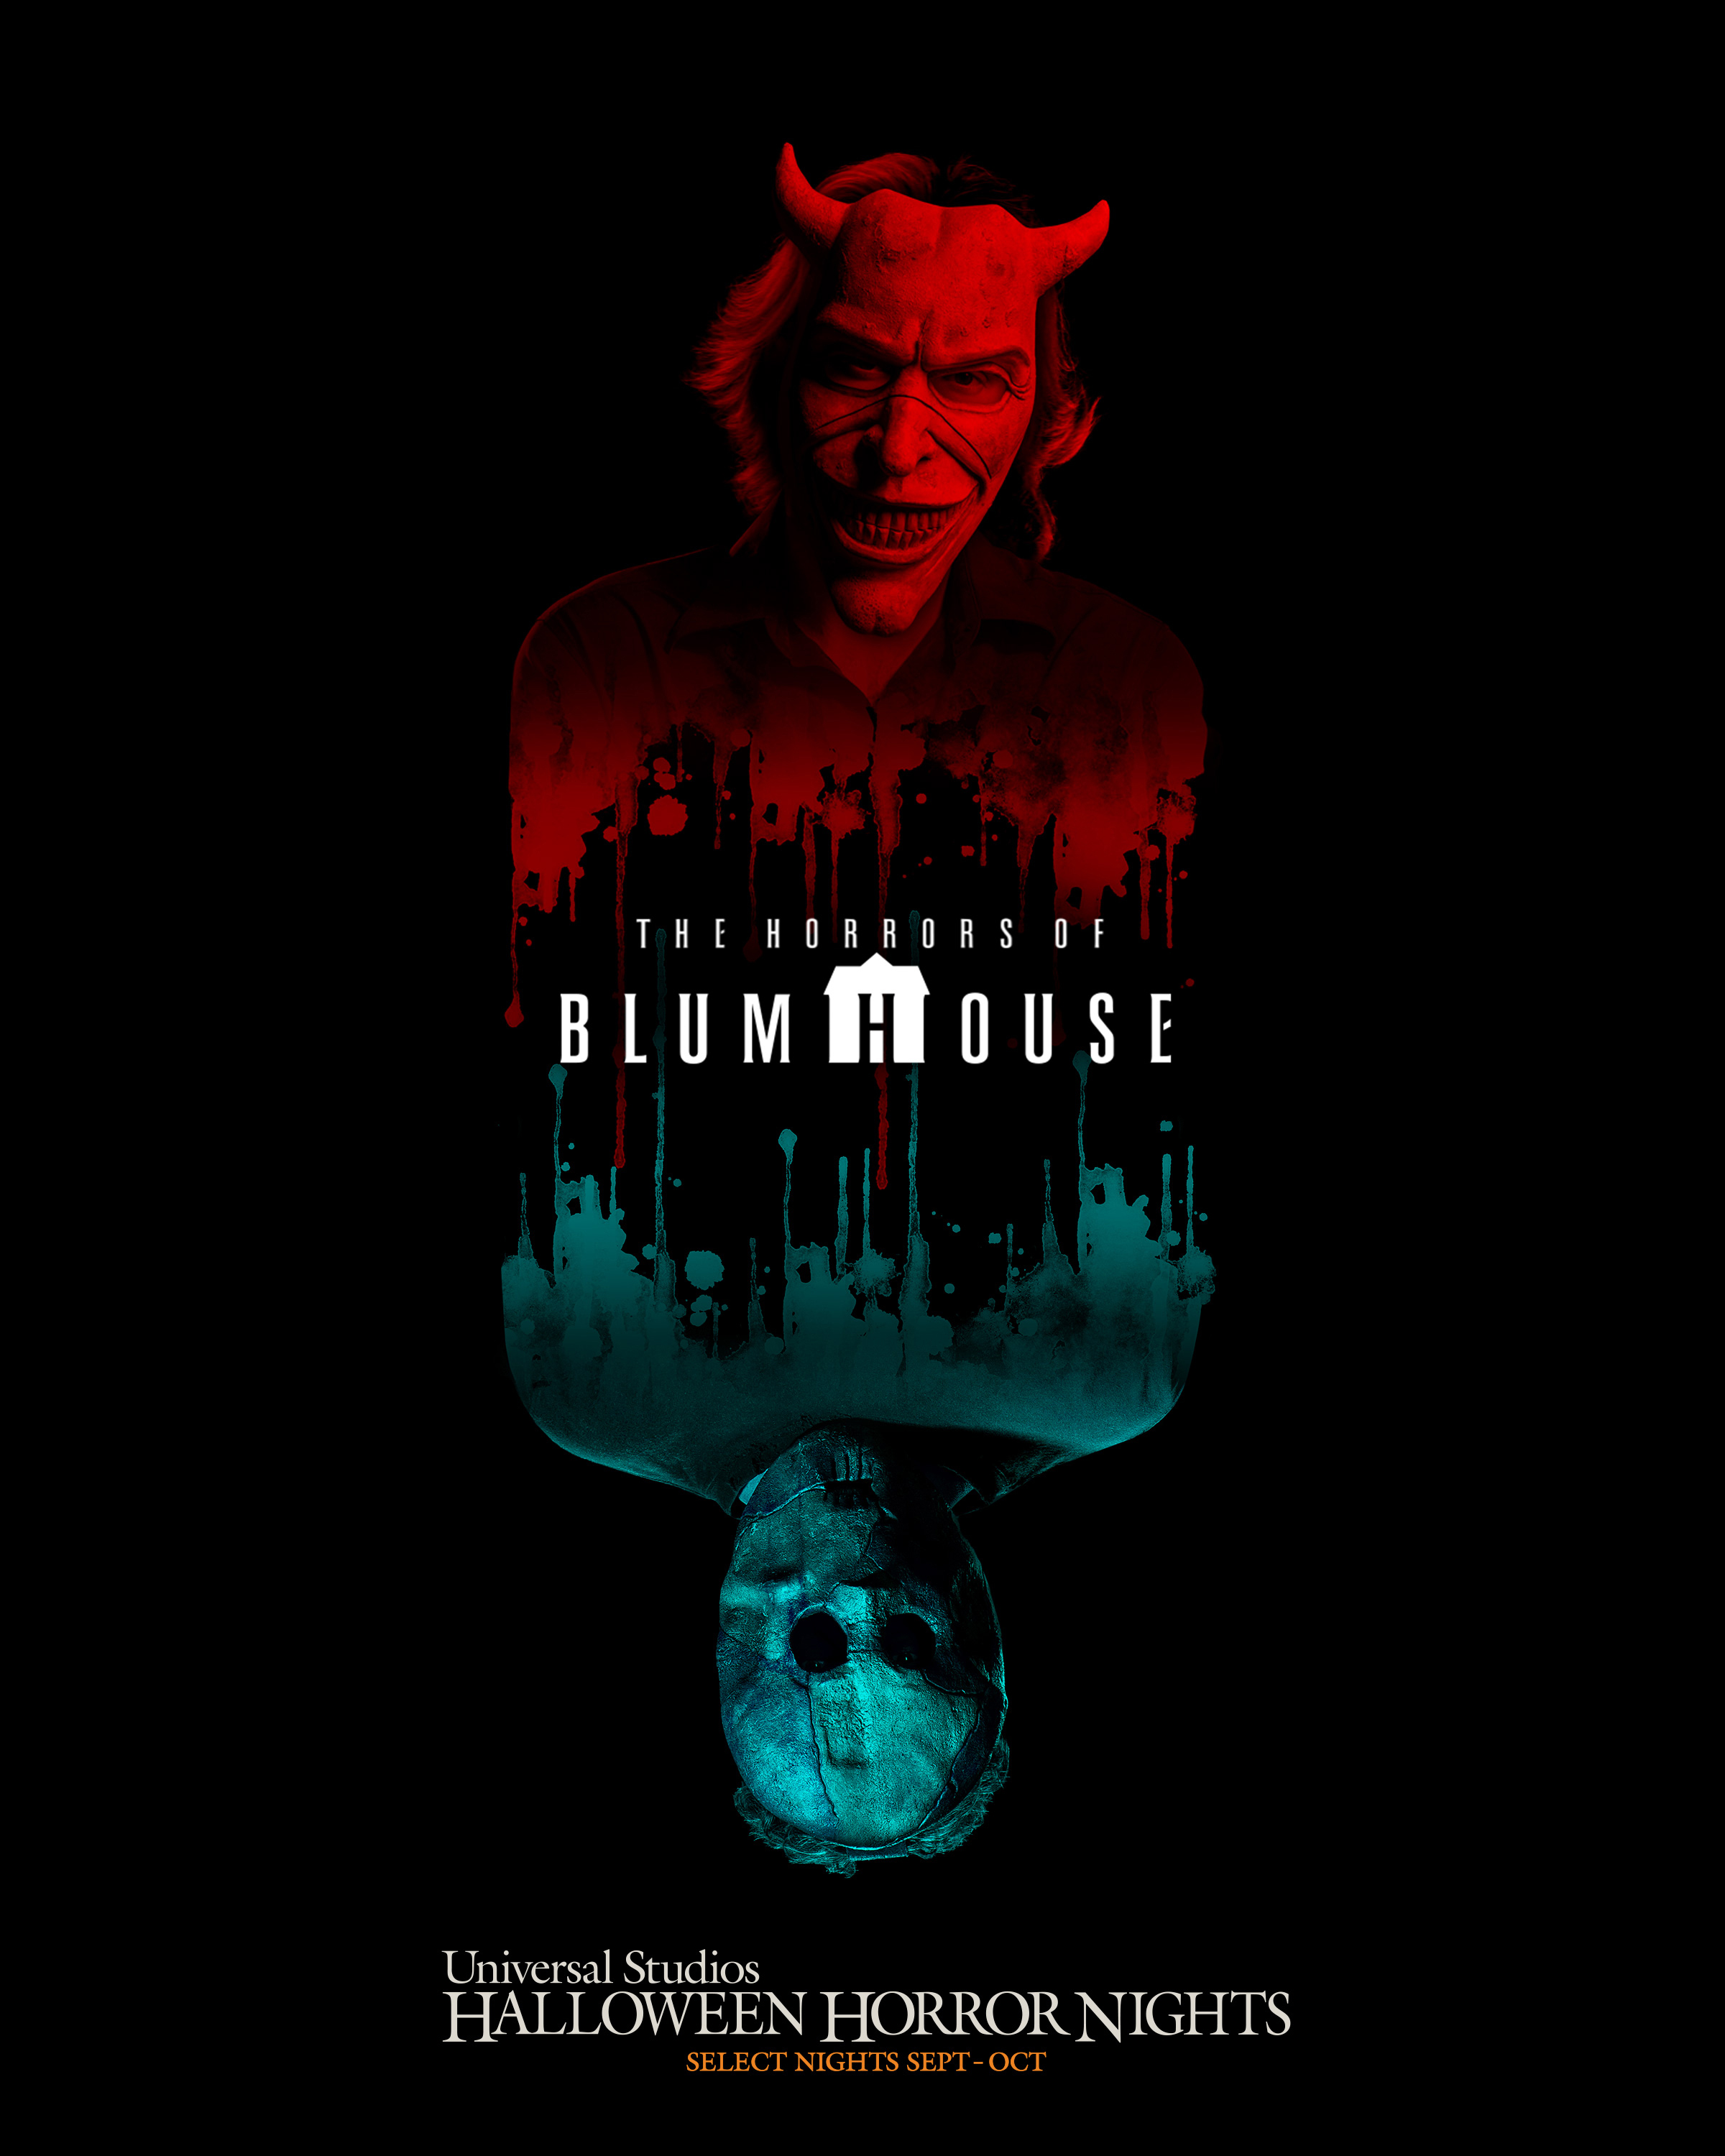 Universal Studios to Debut The Horrors of Blumhouse at Halloween Horror Nights